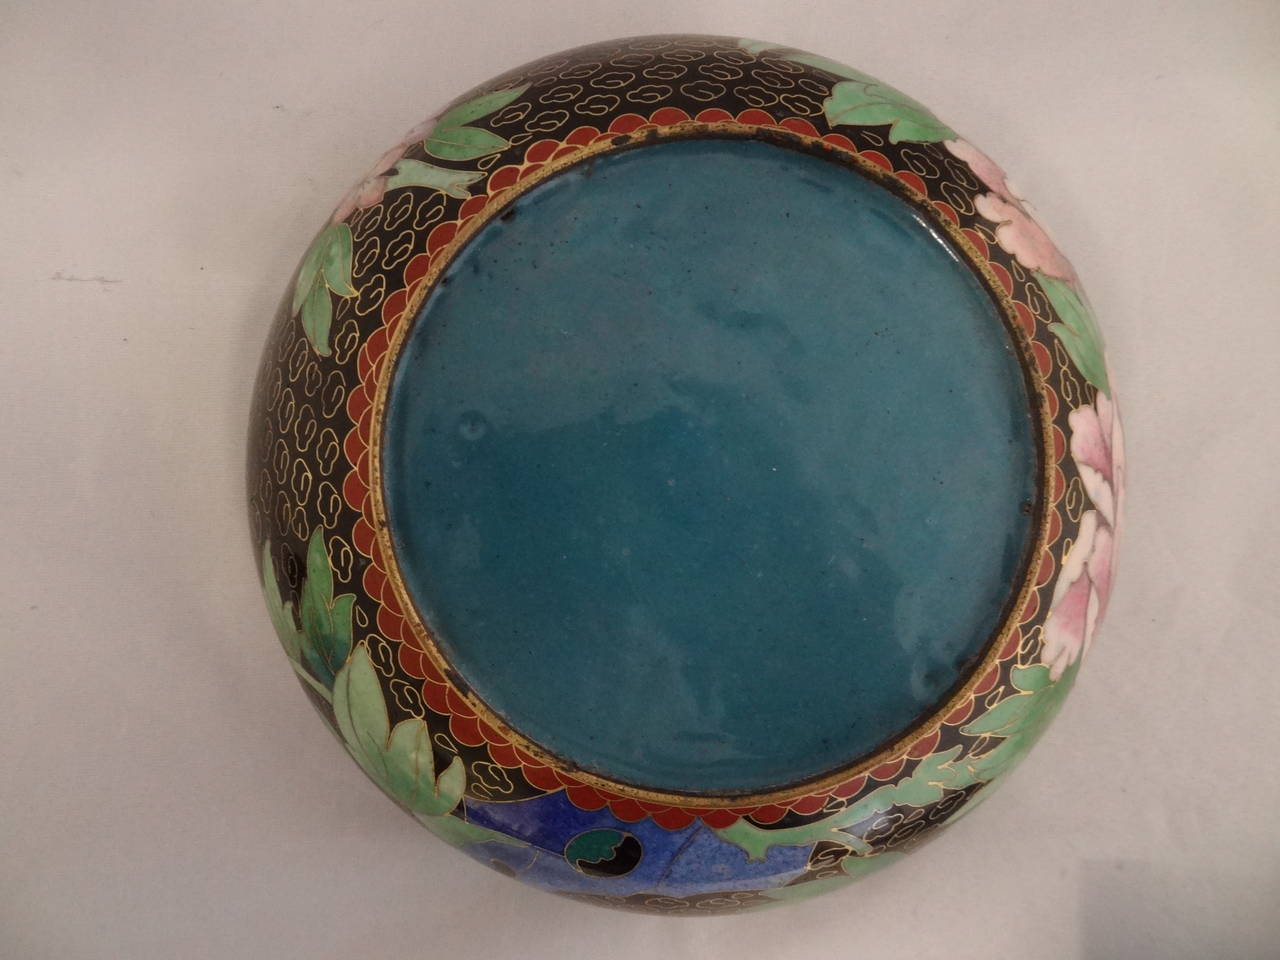 Circular bowl dating from circa 1870 and made in China. The cloisonne work captures the subtle shades of flowers and leaves